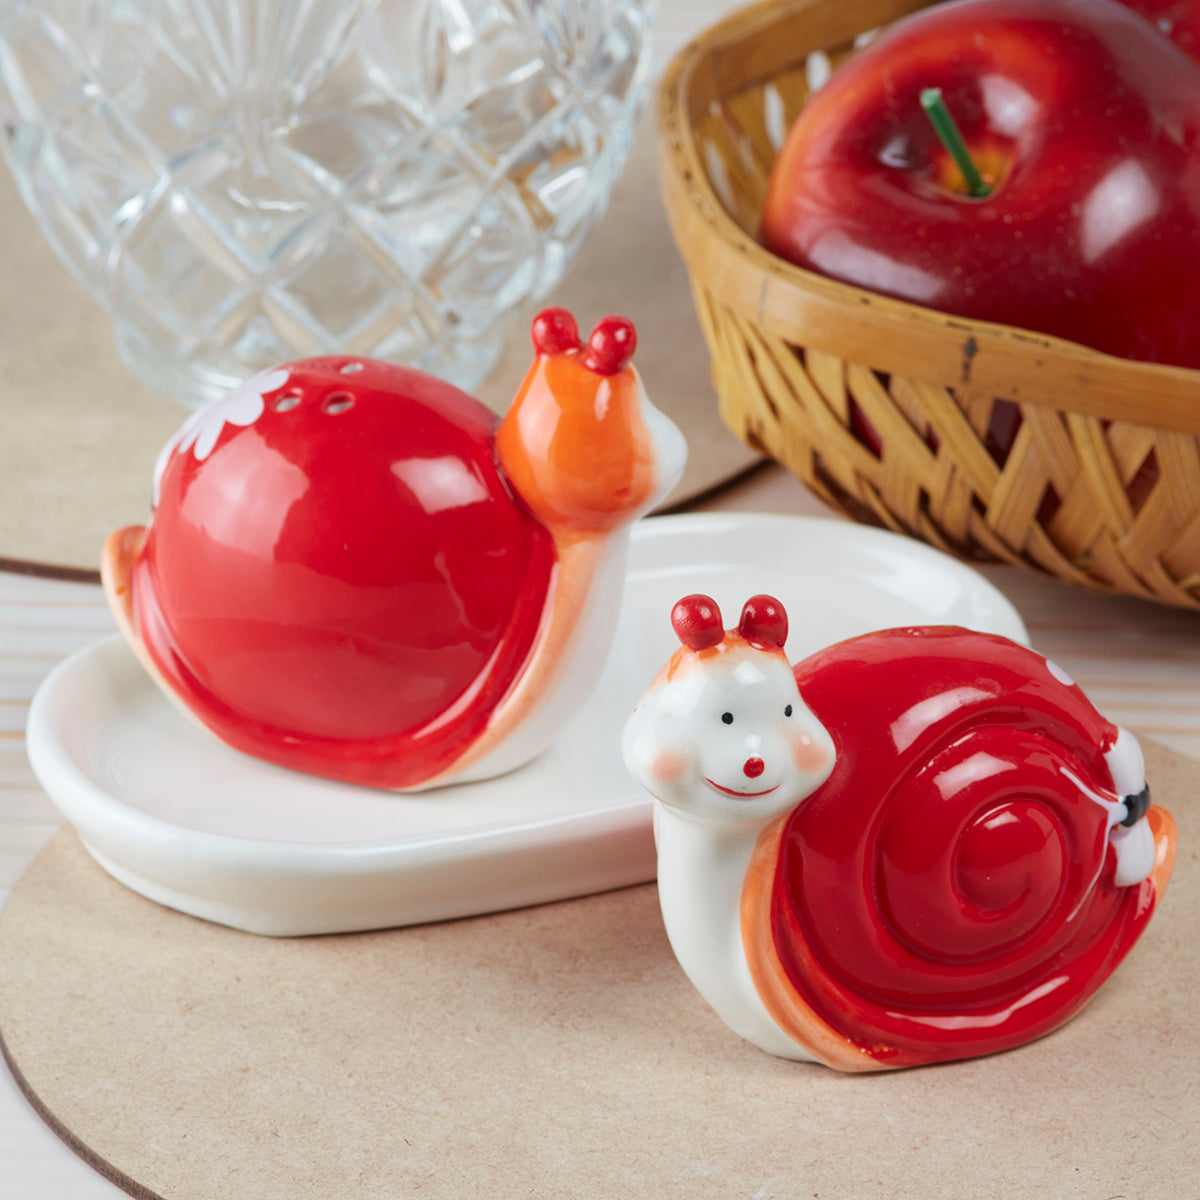 Ceramic Salt and Pepper Set with tray, Snail Design, Red White (8570)